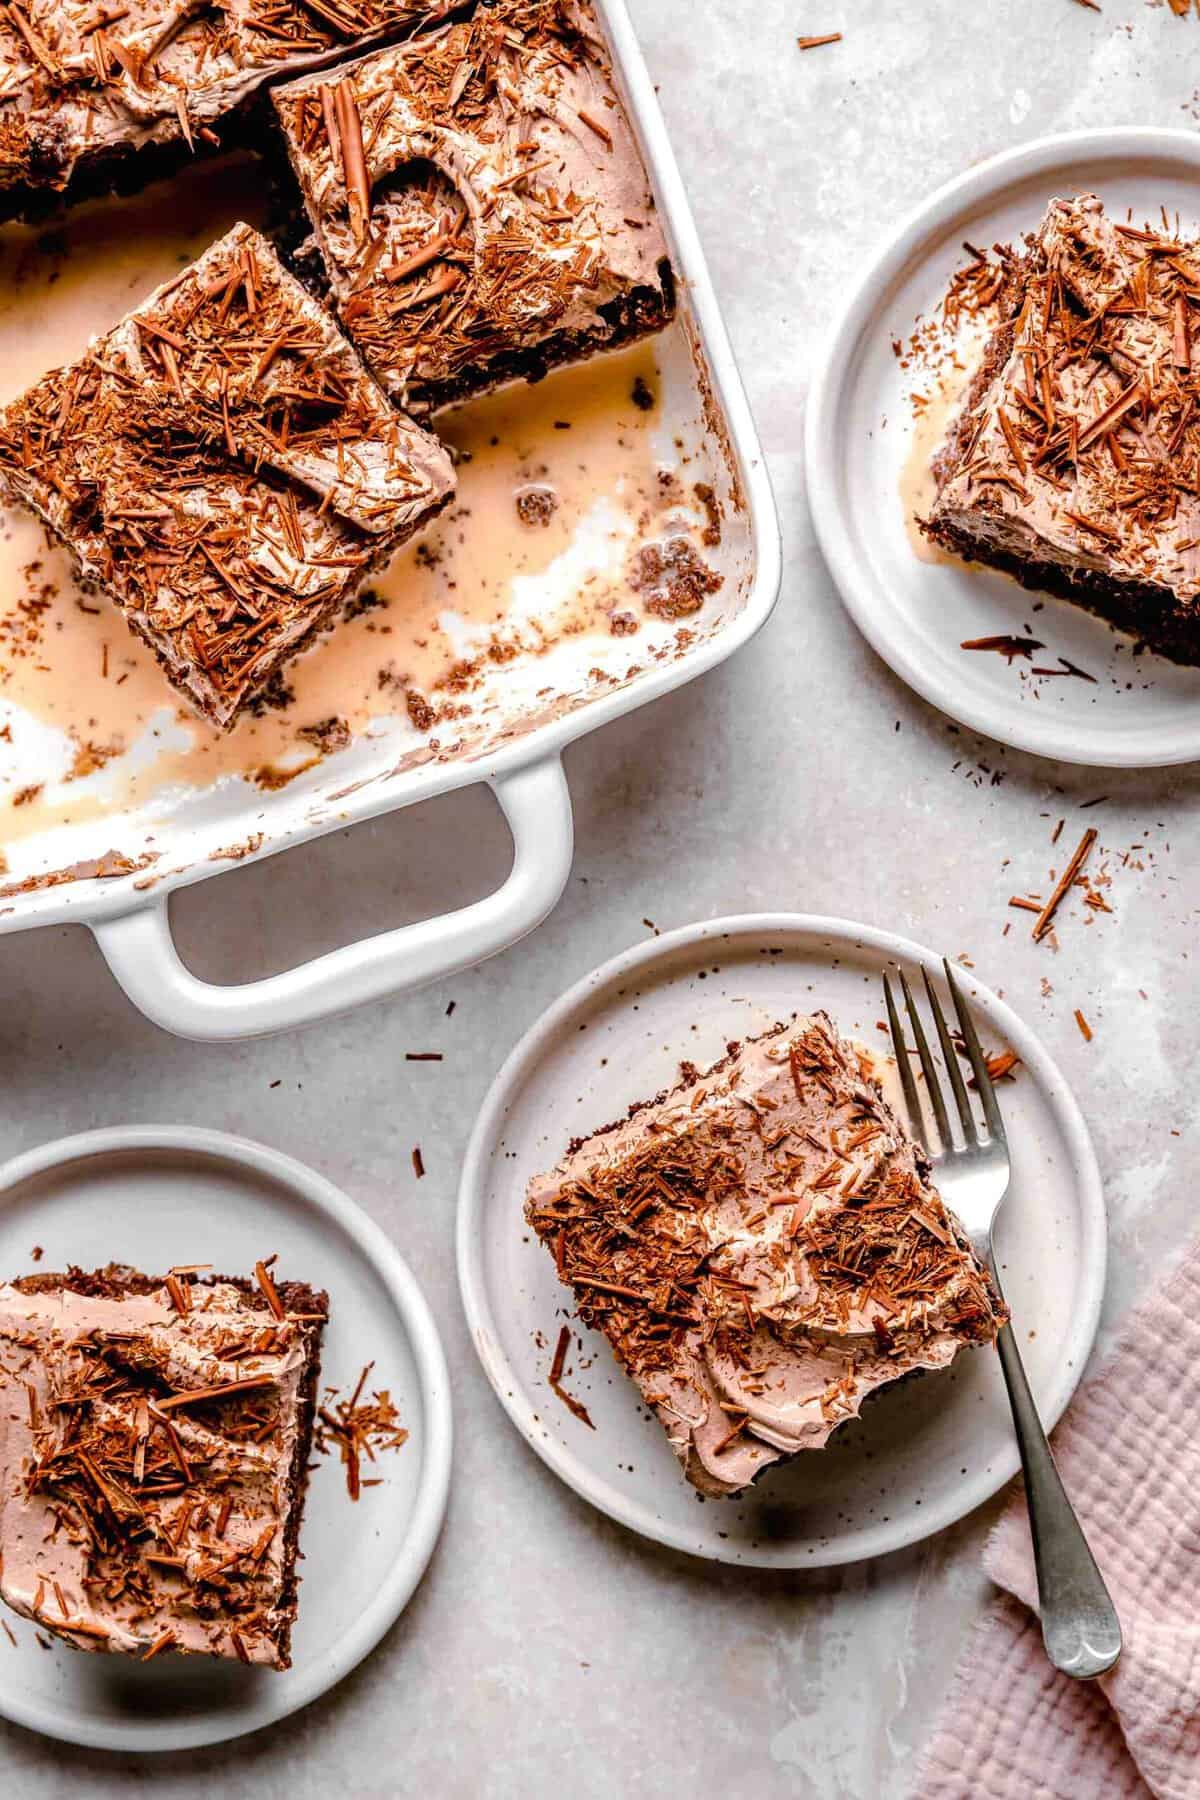 Sliced chocolate tres leches cake on plates with a fork next to a baking dish full of chocolate tres leches cake.